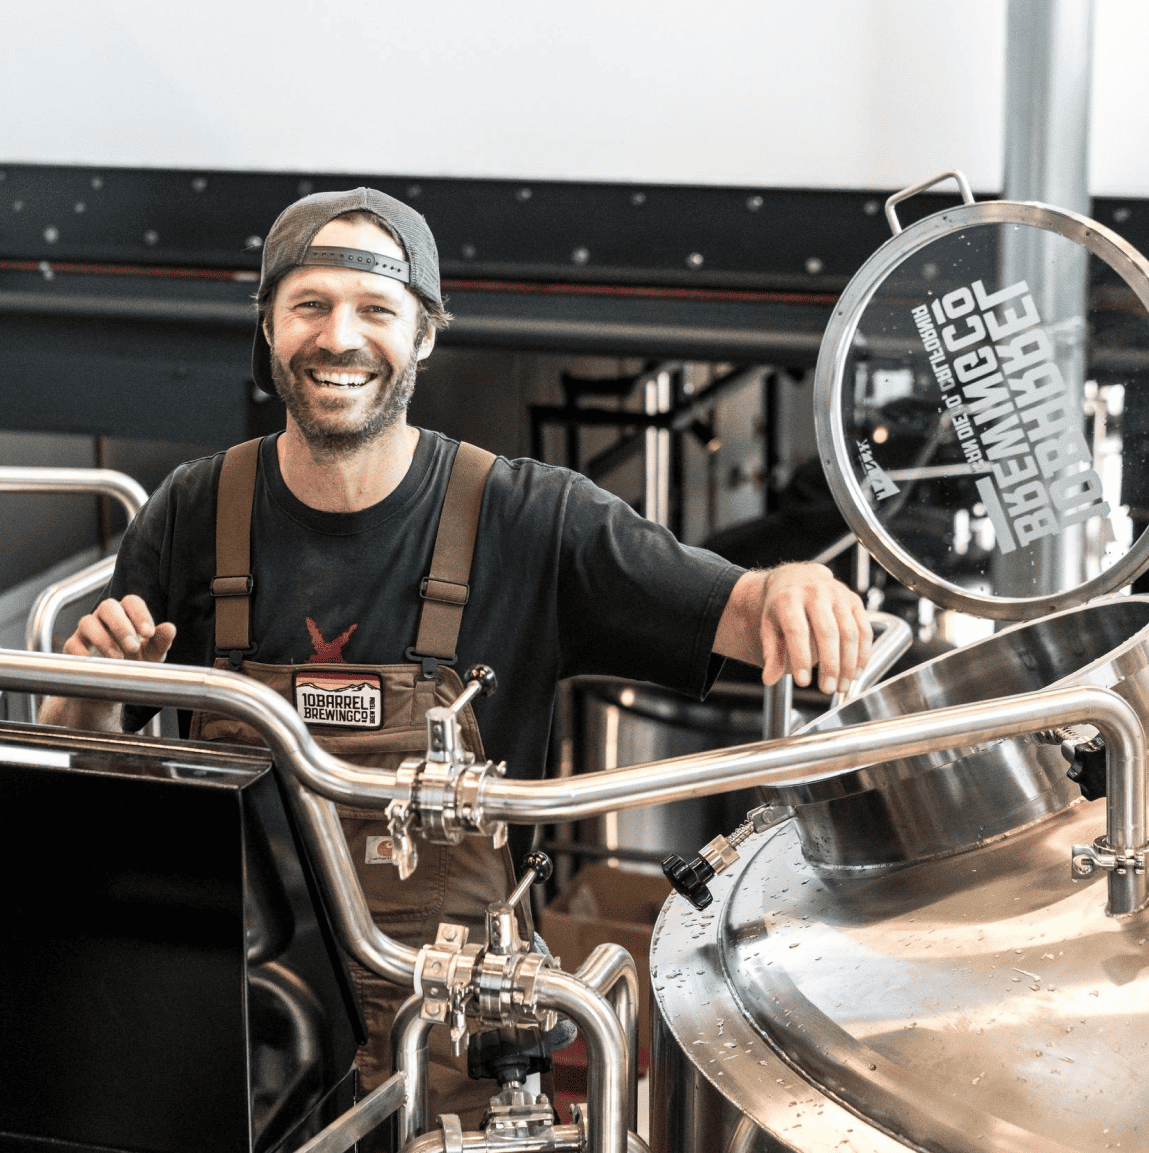 A smiling man in his workshop standing next to brewing equipment